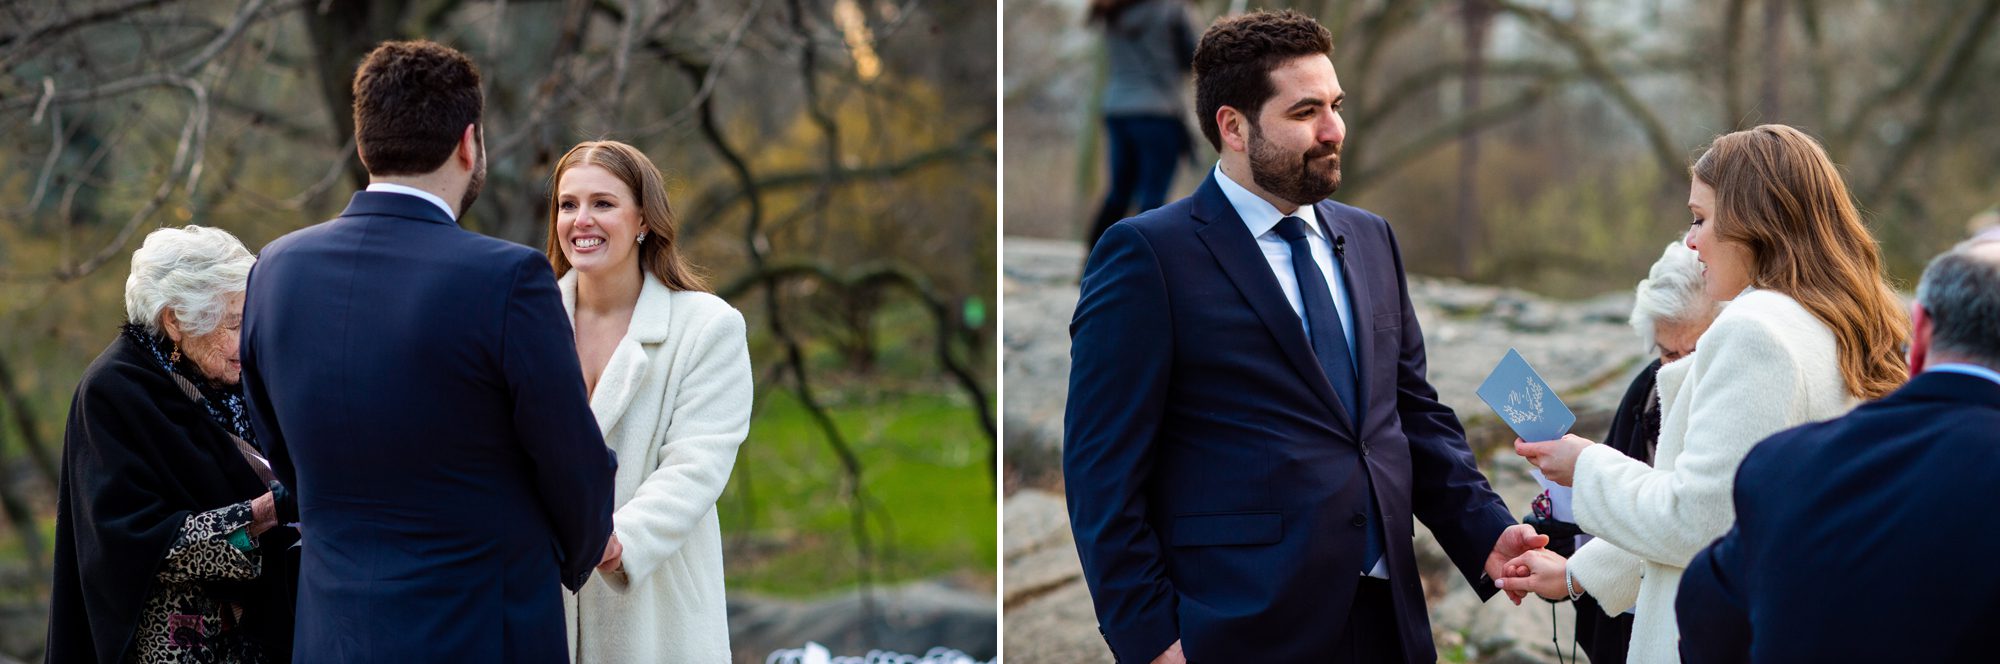 Exchanging Vows in Central Park 